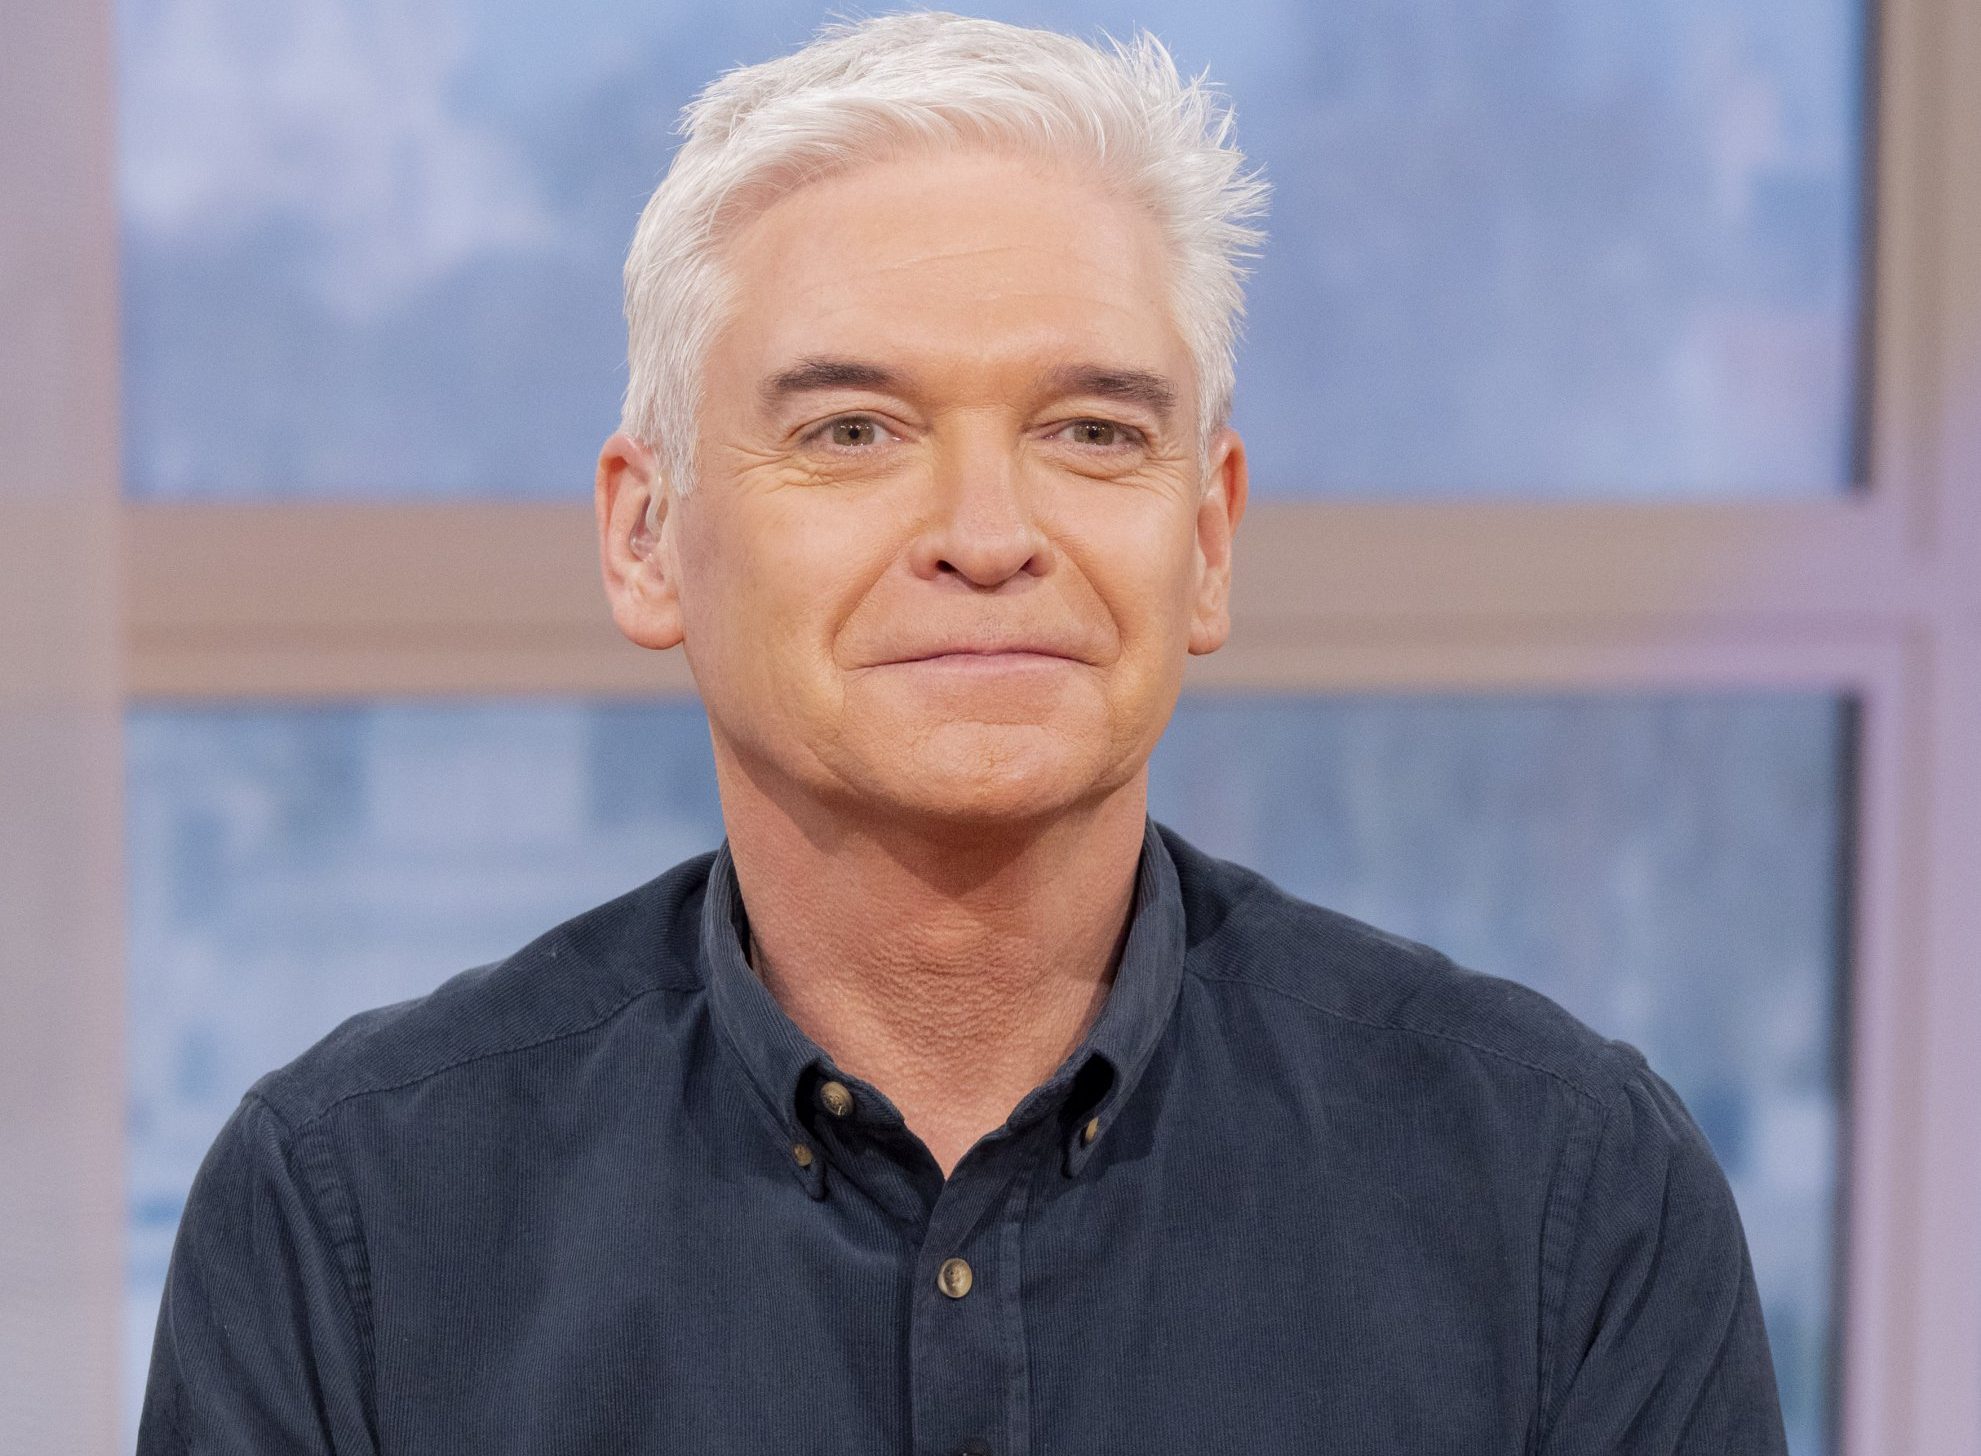 This Morning: Where is Phillip Schofield and when will he be back? | Metro News